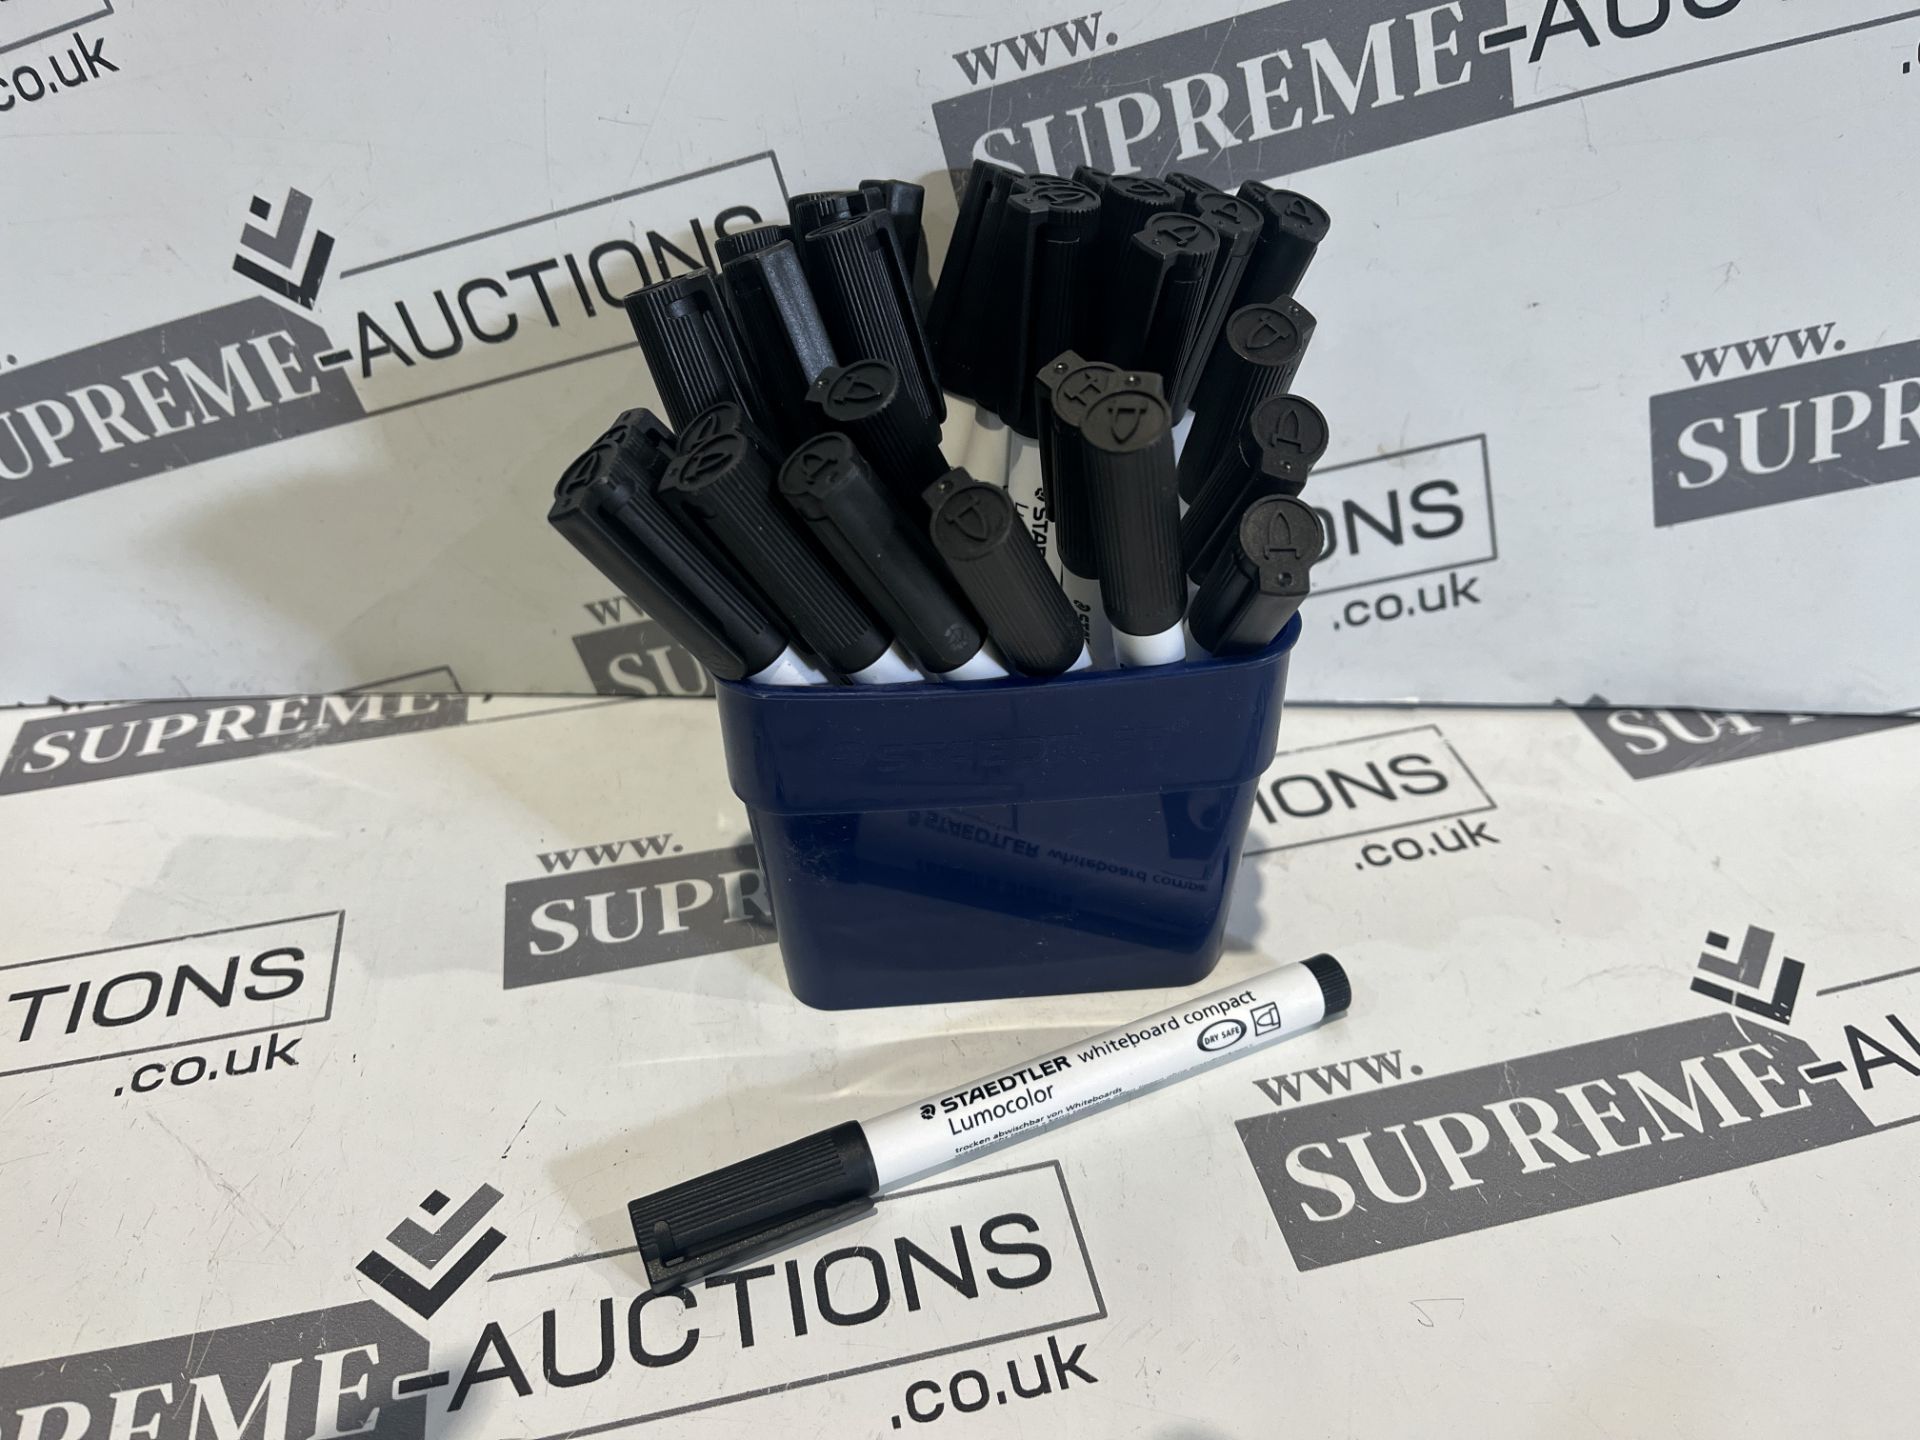 TRADE LOT 35 X BRAND NEW PACKS OF 36 STAEDTLER BLACK WHITEBOARD COMPACT MARKERS R9.9/9.10